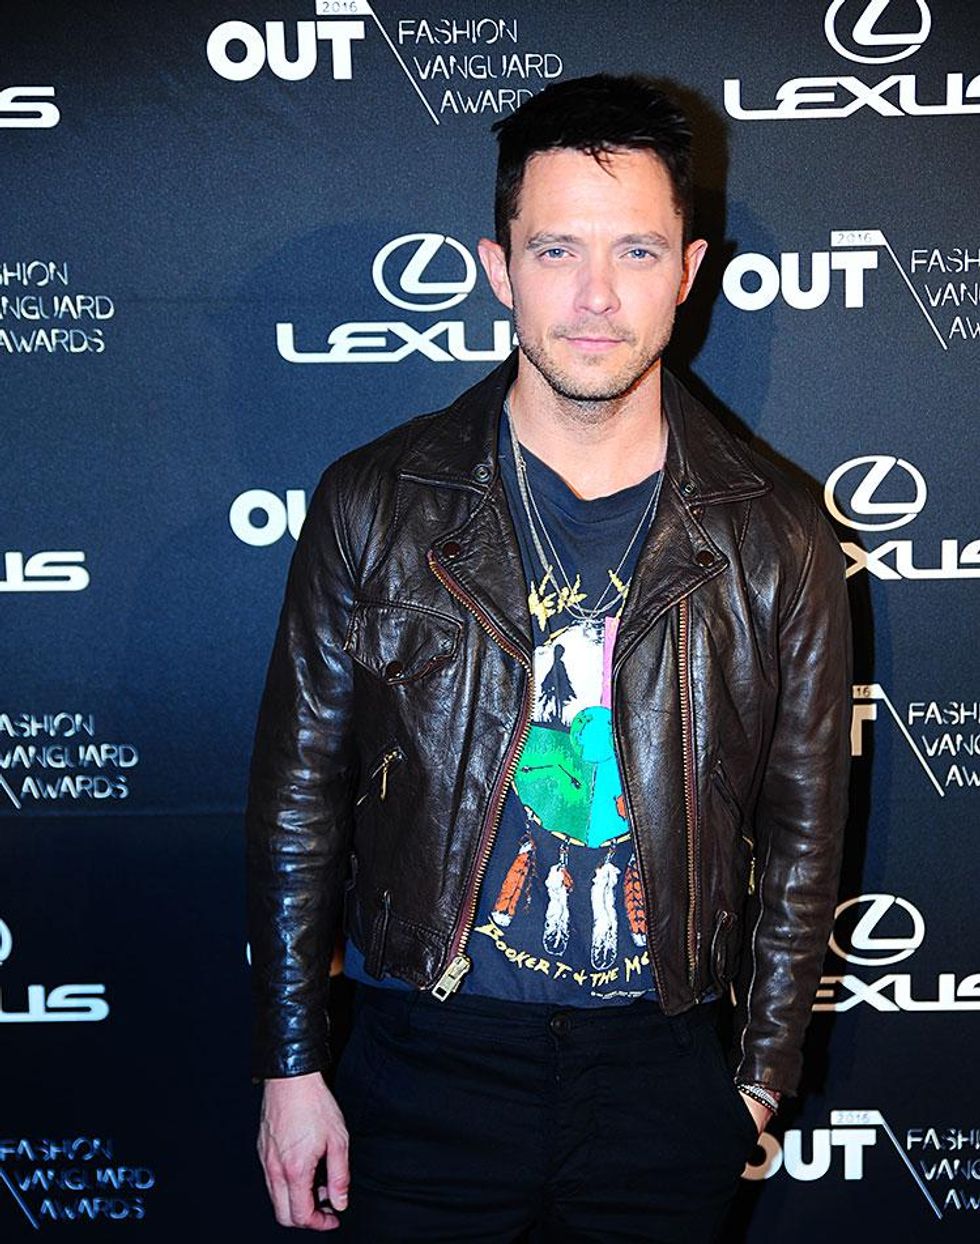 Singer and songwriter Eli Lieb